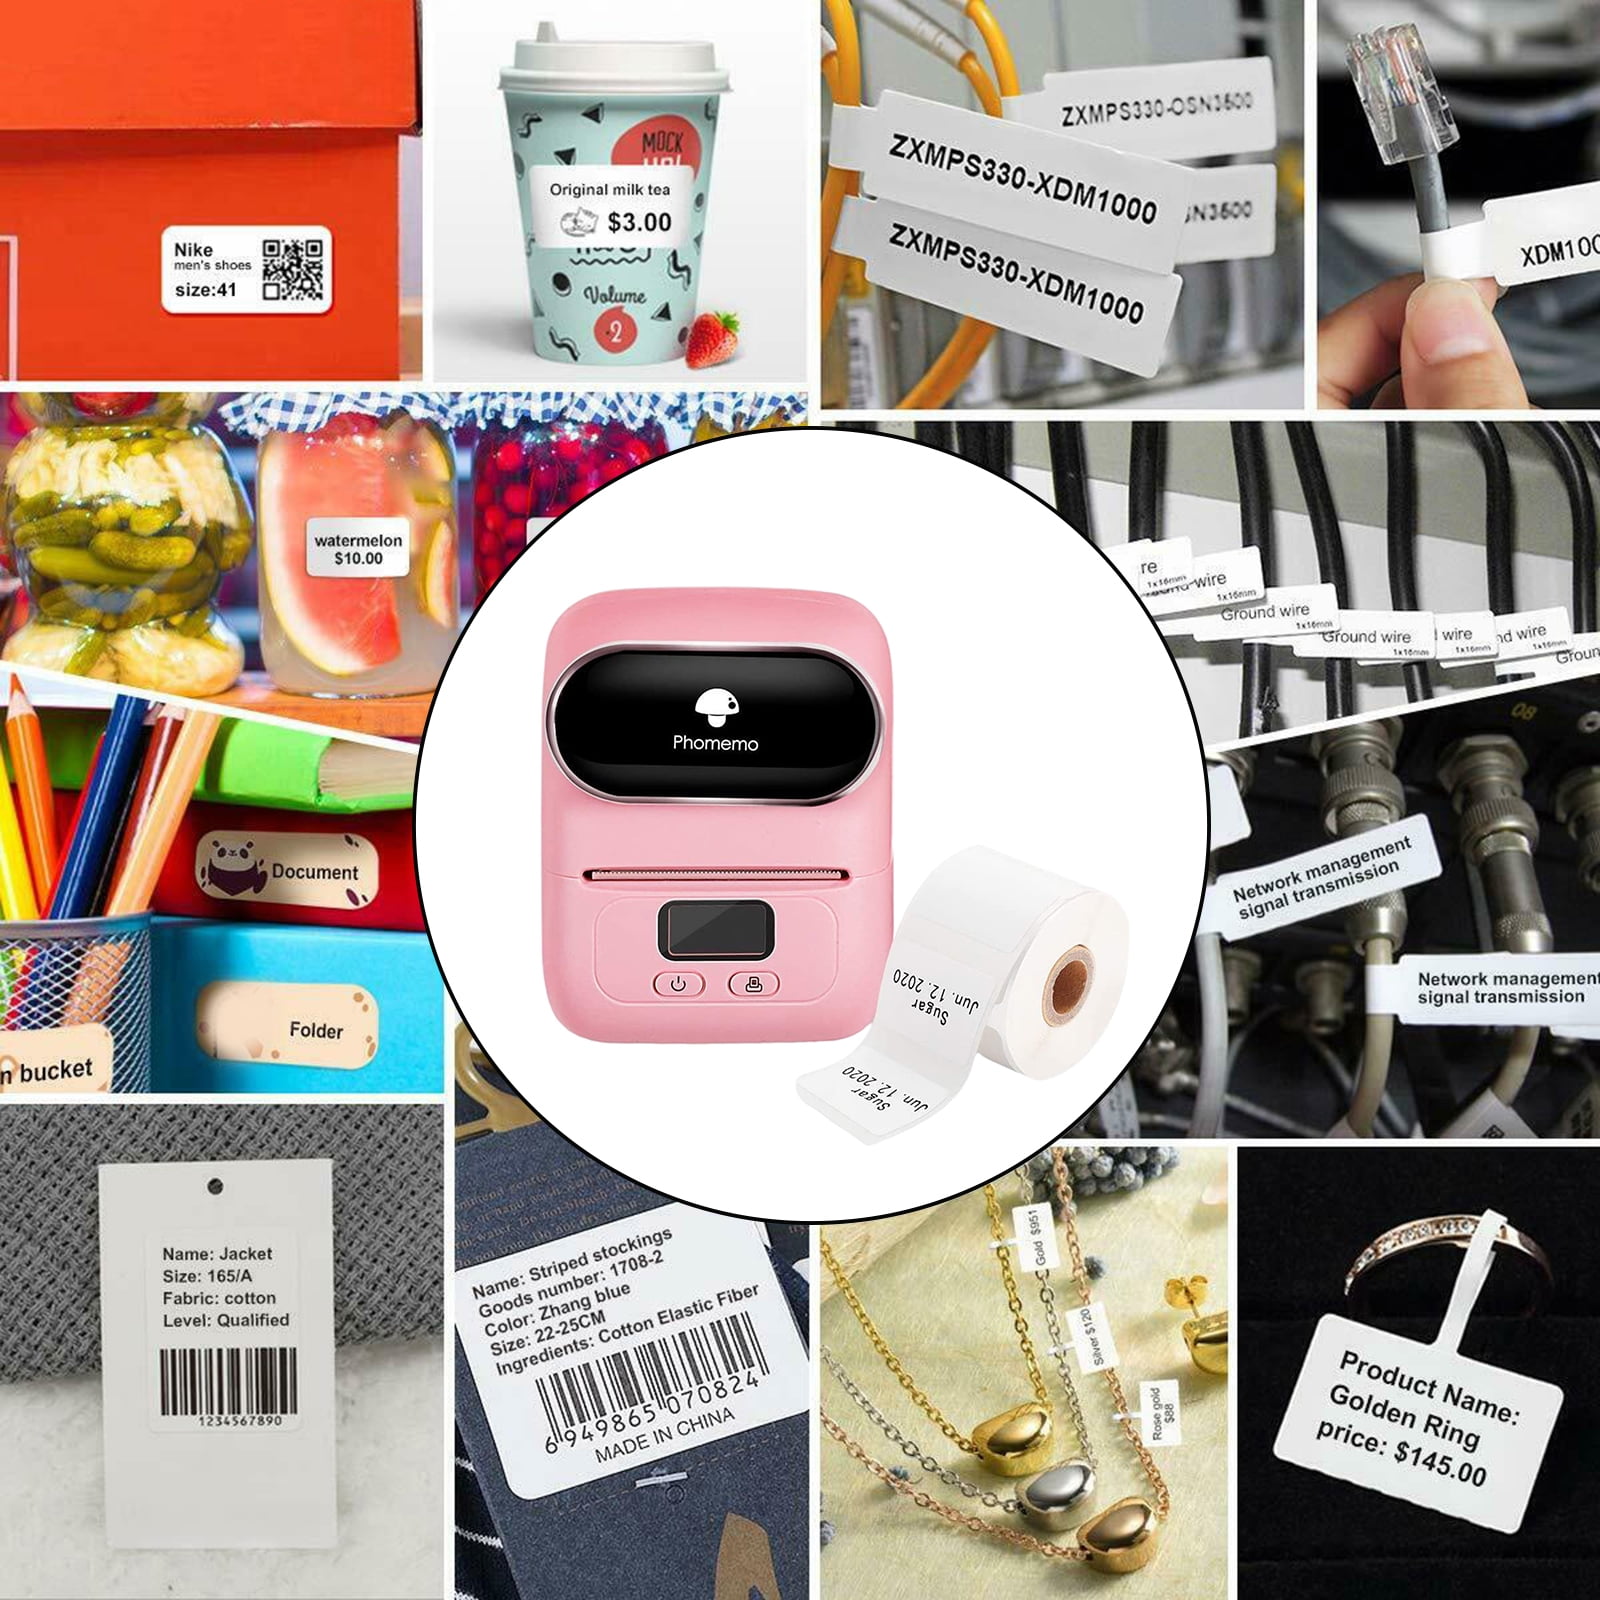 Image Photo Printer Mini Wireless POS Thermal Printer Portable Mini Printer Thermal Bluetooth Label Maker with 1 Roller Label Paper Pink Pocket Printer Compatible with Android and iOS 